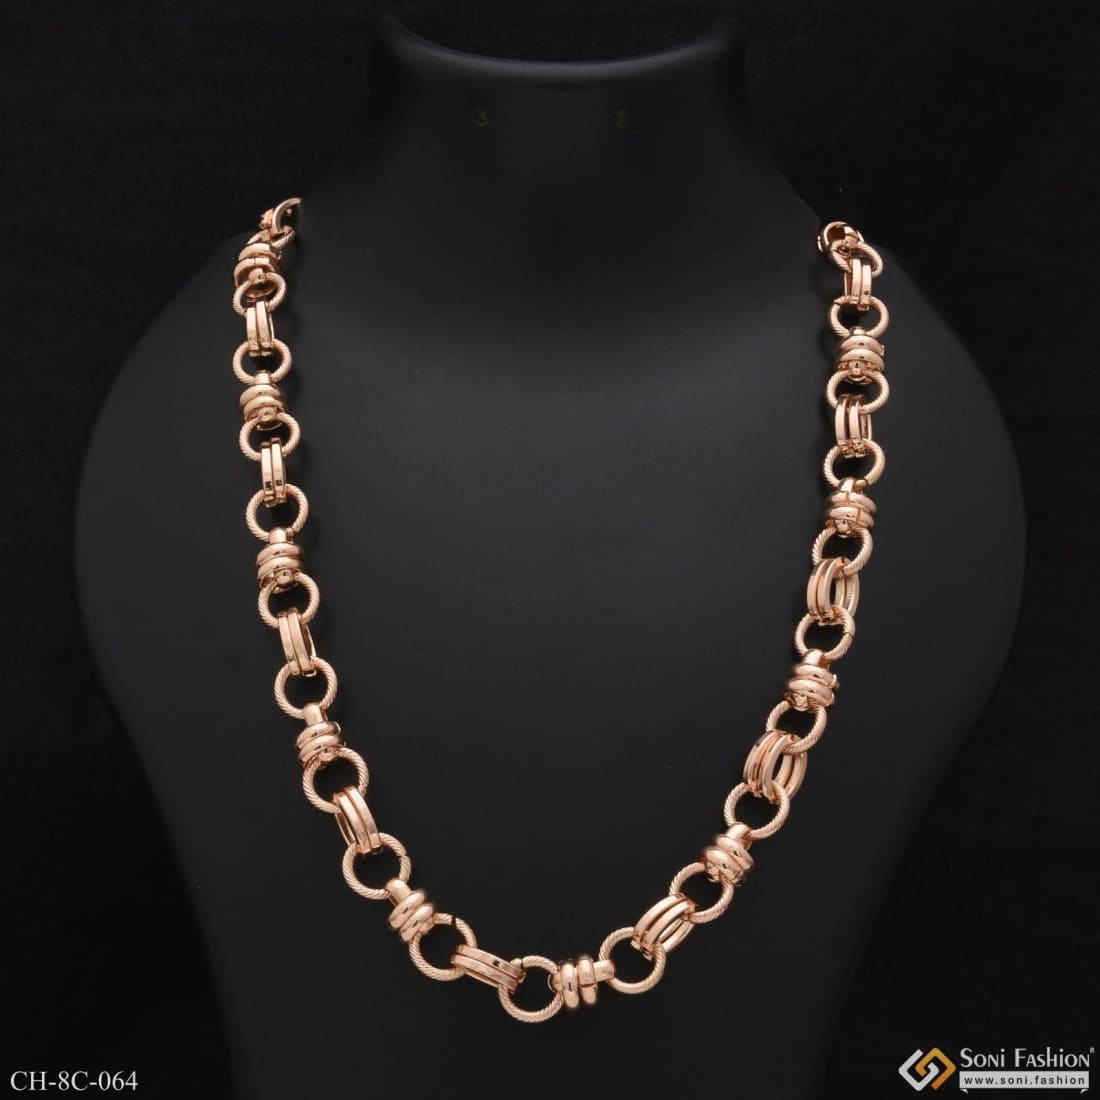 Solid 14K Rose Gold 6mm Diamond Cut Rope Chain Necklace 22″ - 30″ | WJD  Exclusives